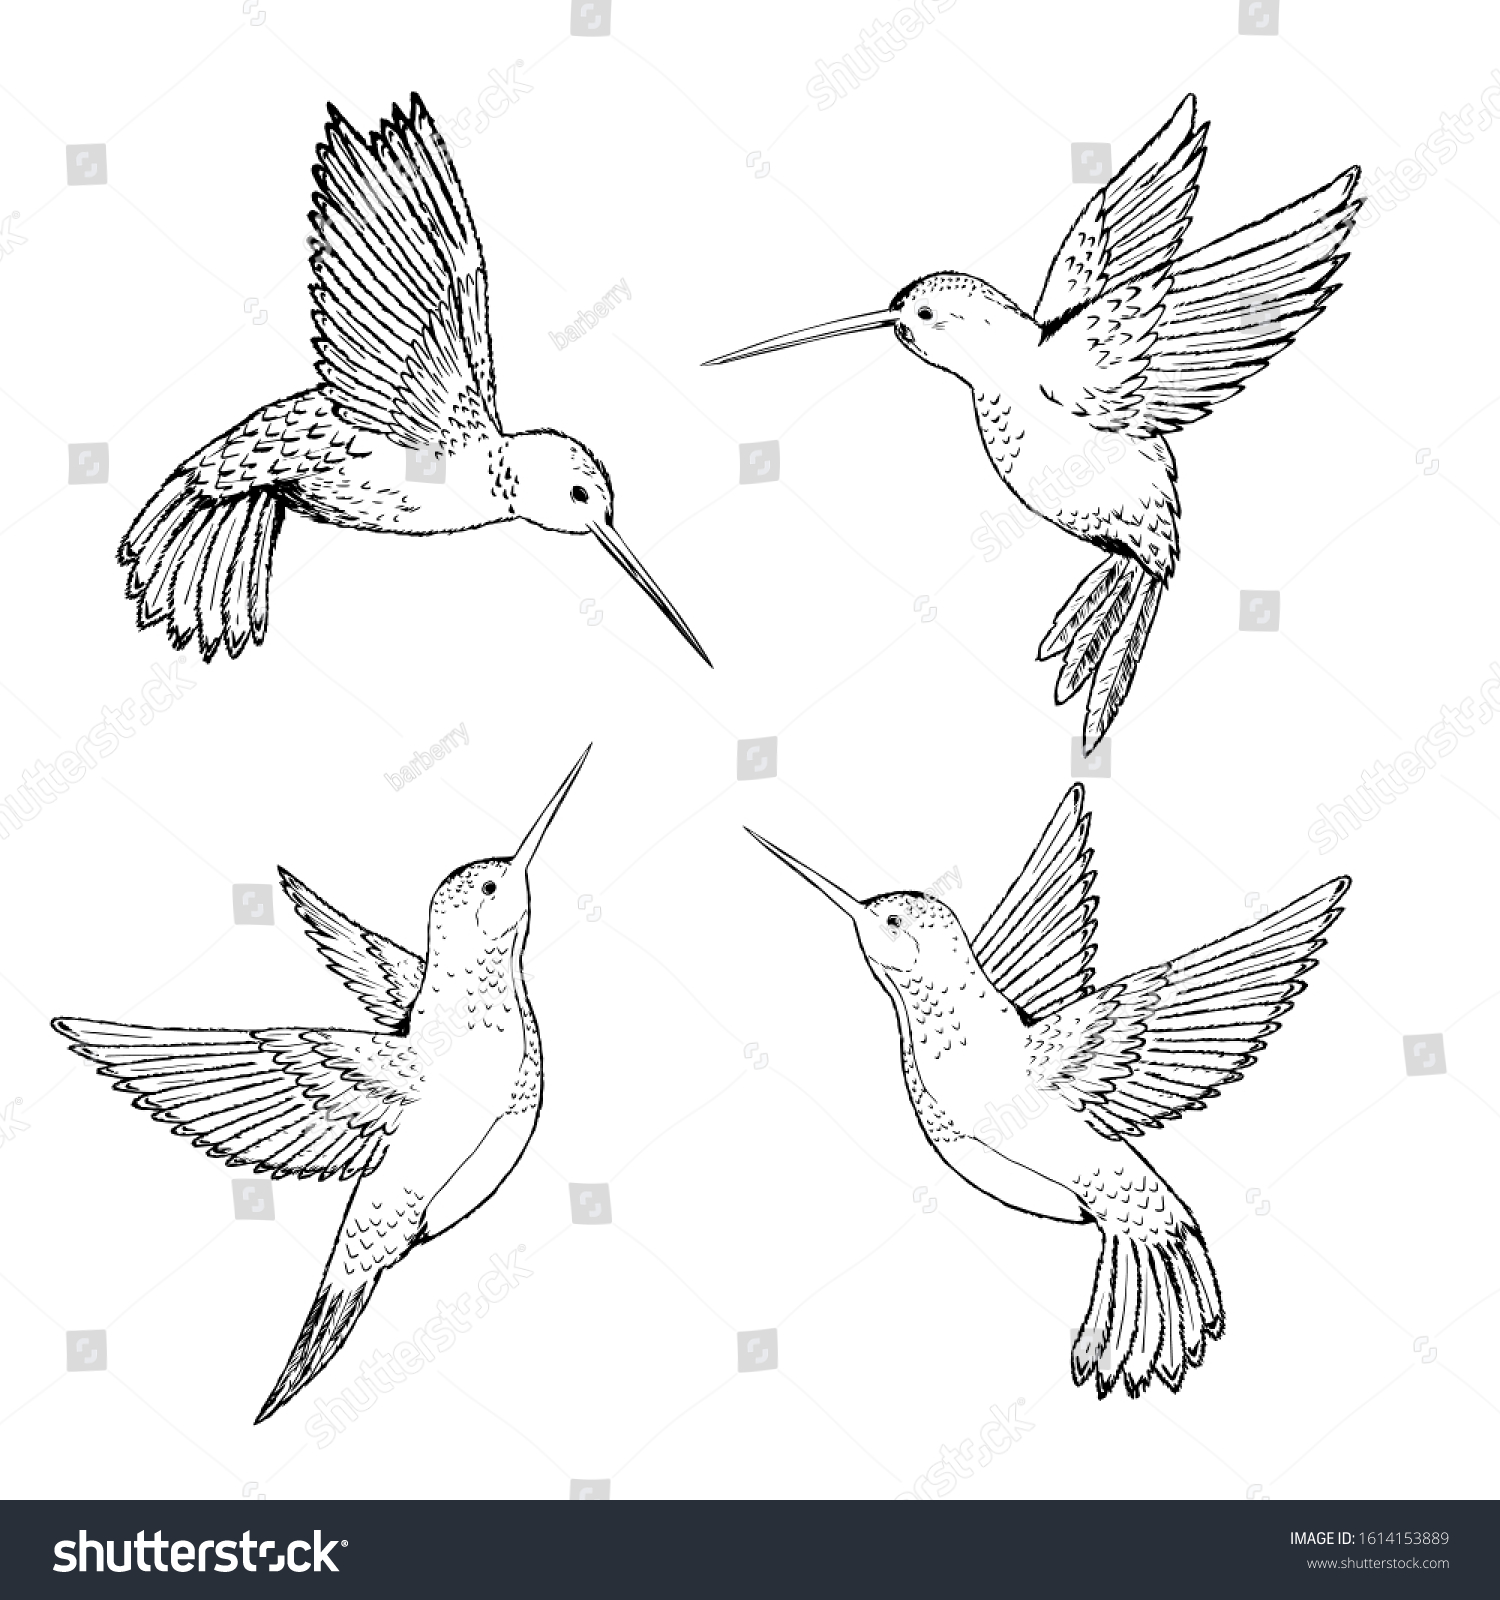 Set hummingbirds. Sketch pencil. Drawing by hand.  #1614153889